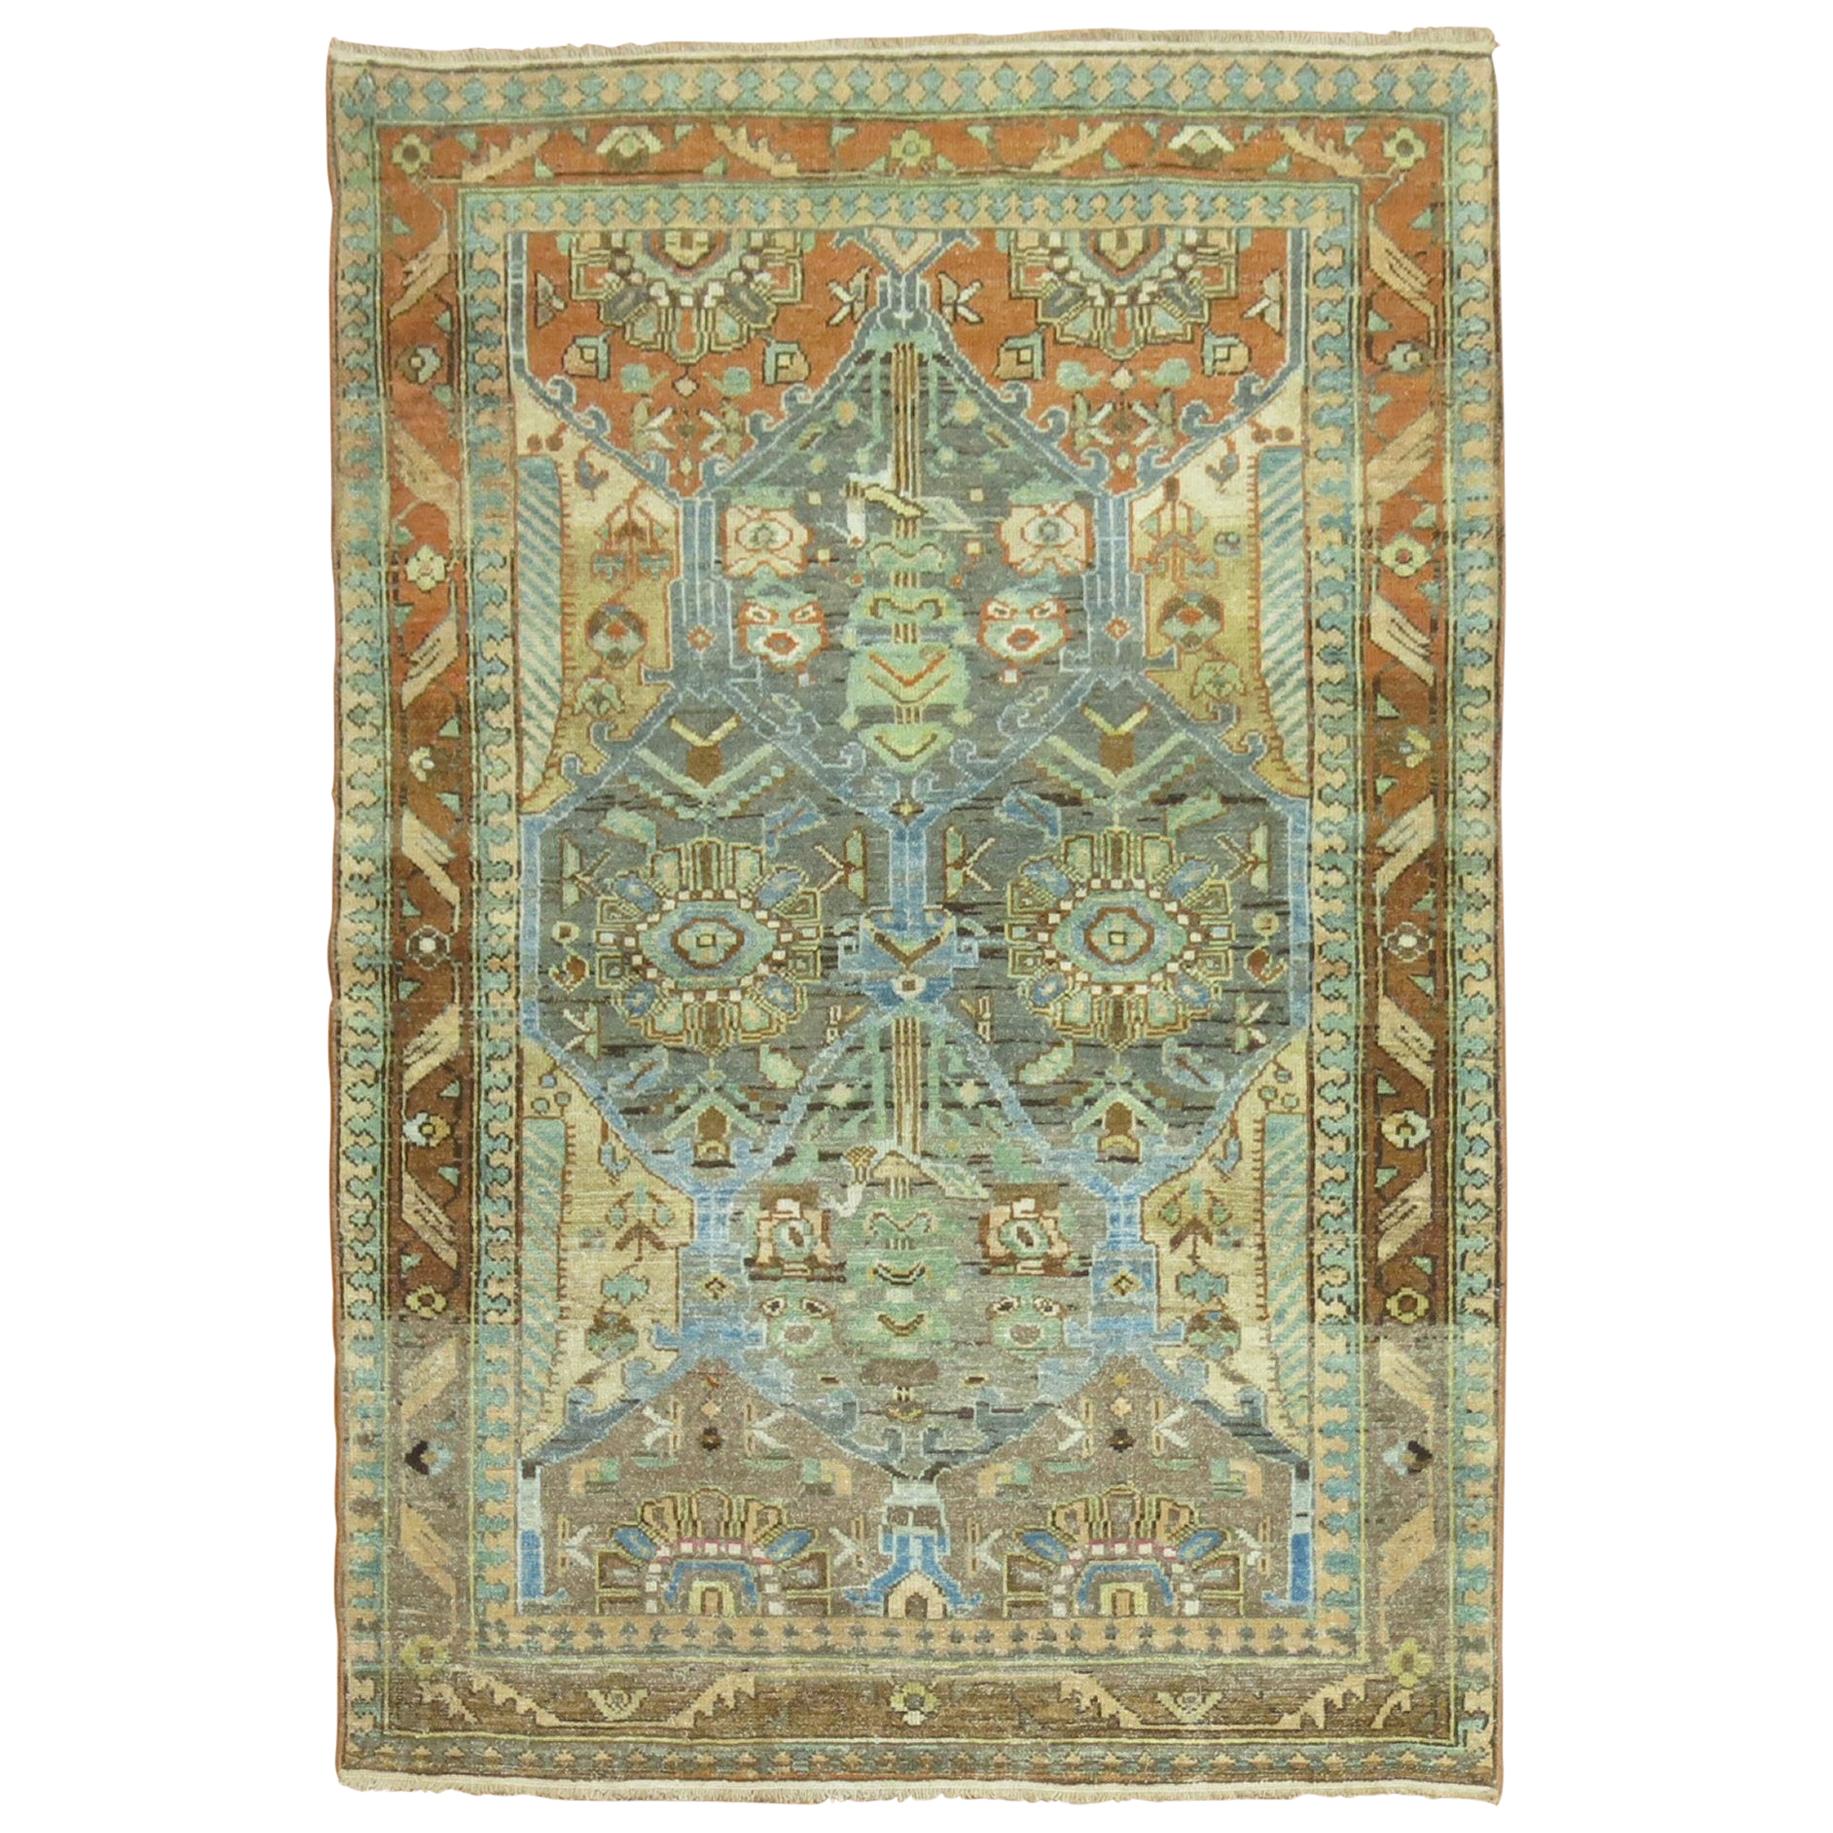 Eloquent Persian Malayer Scatter Square Rug